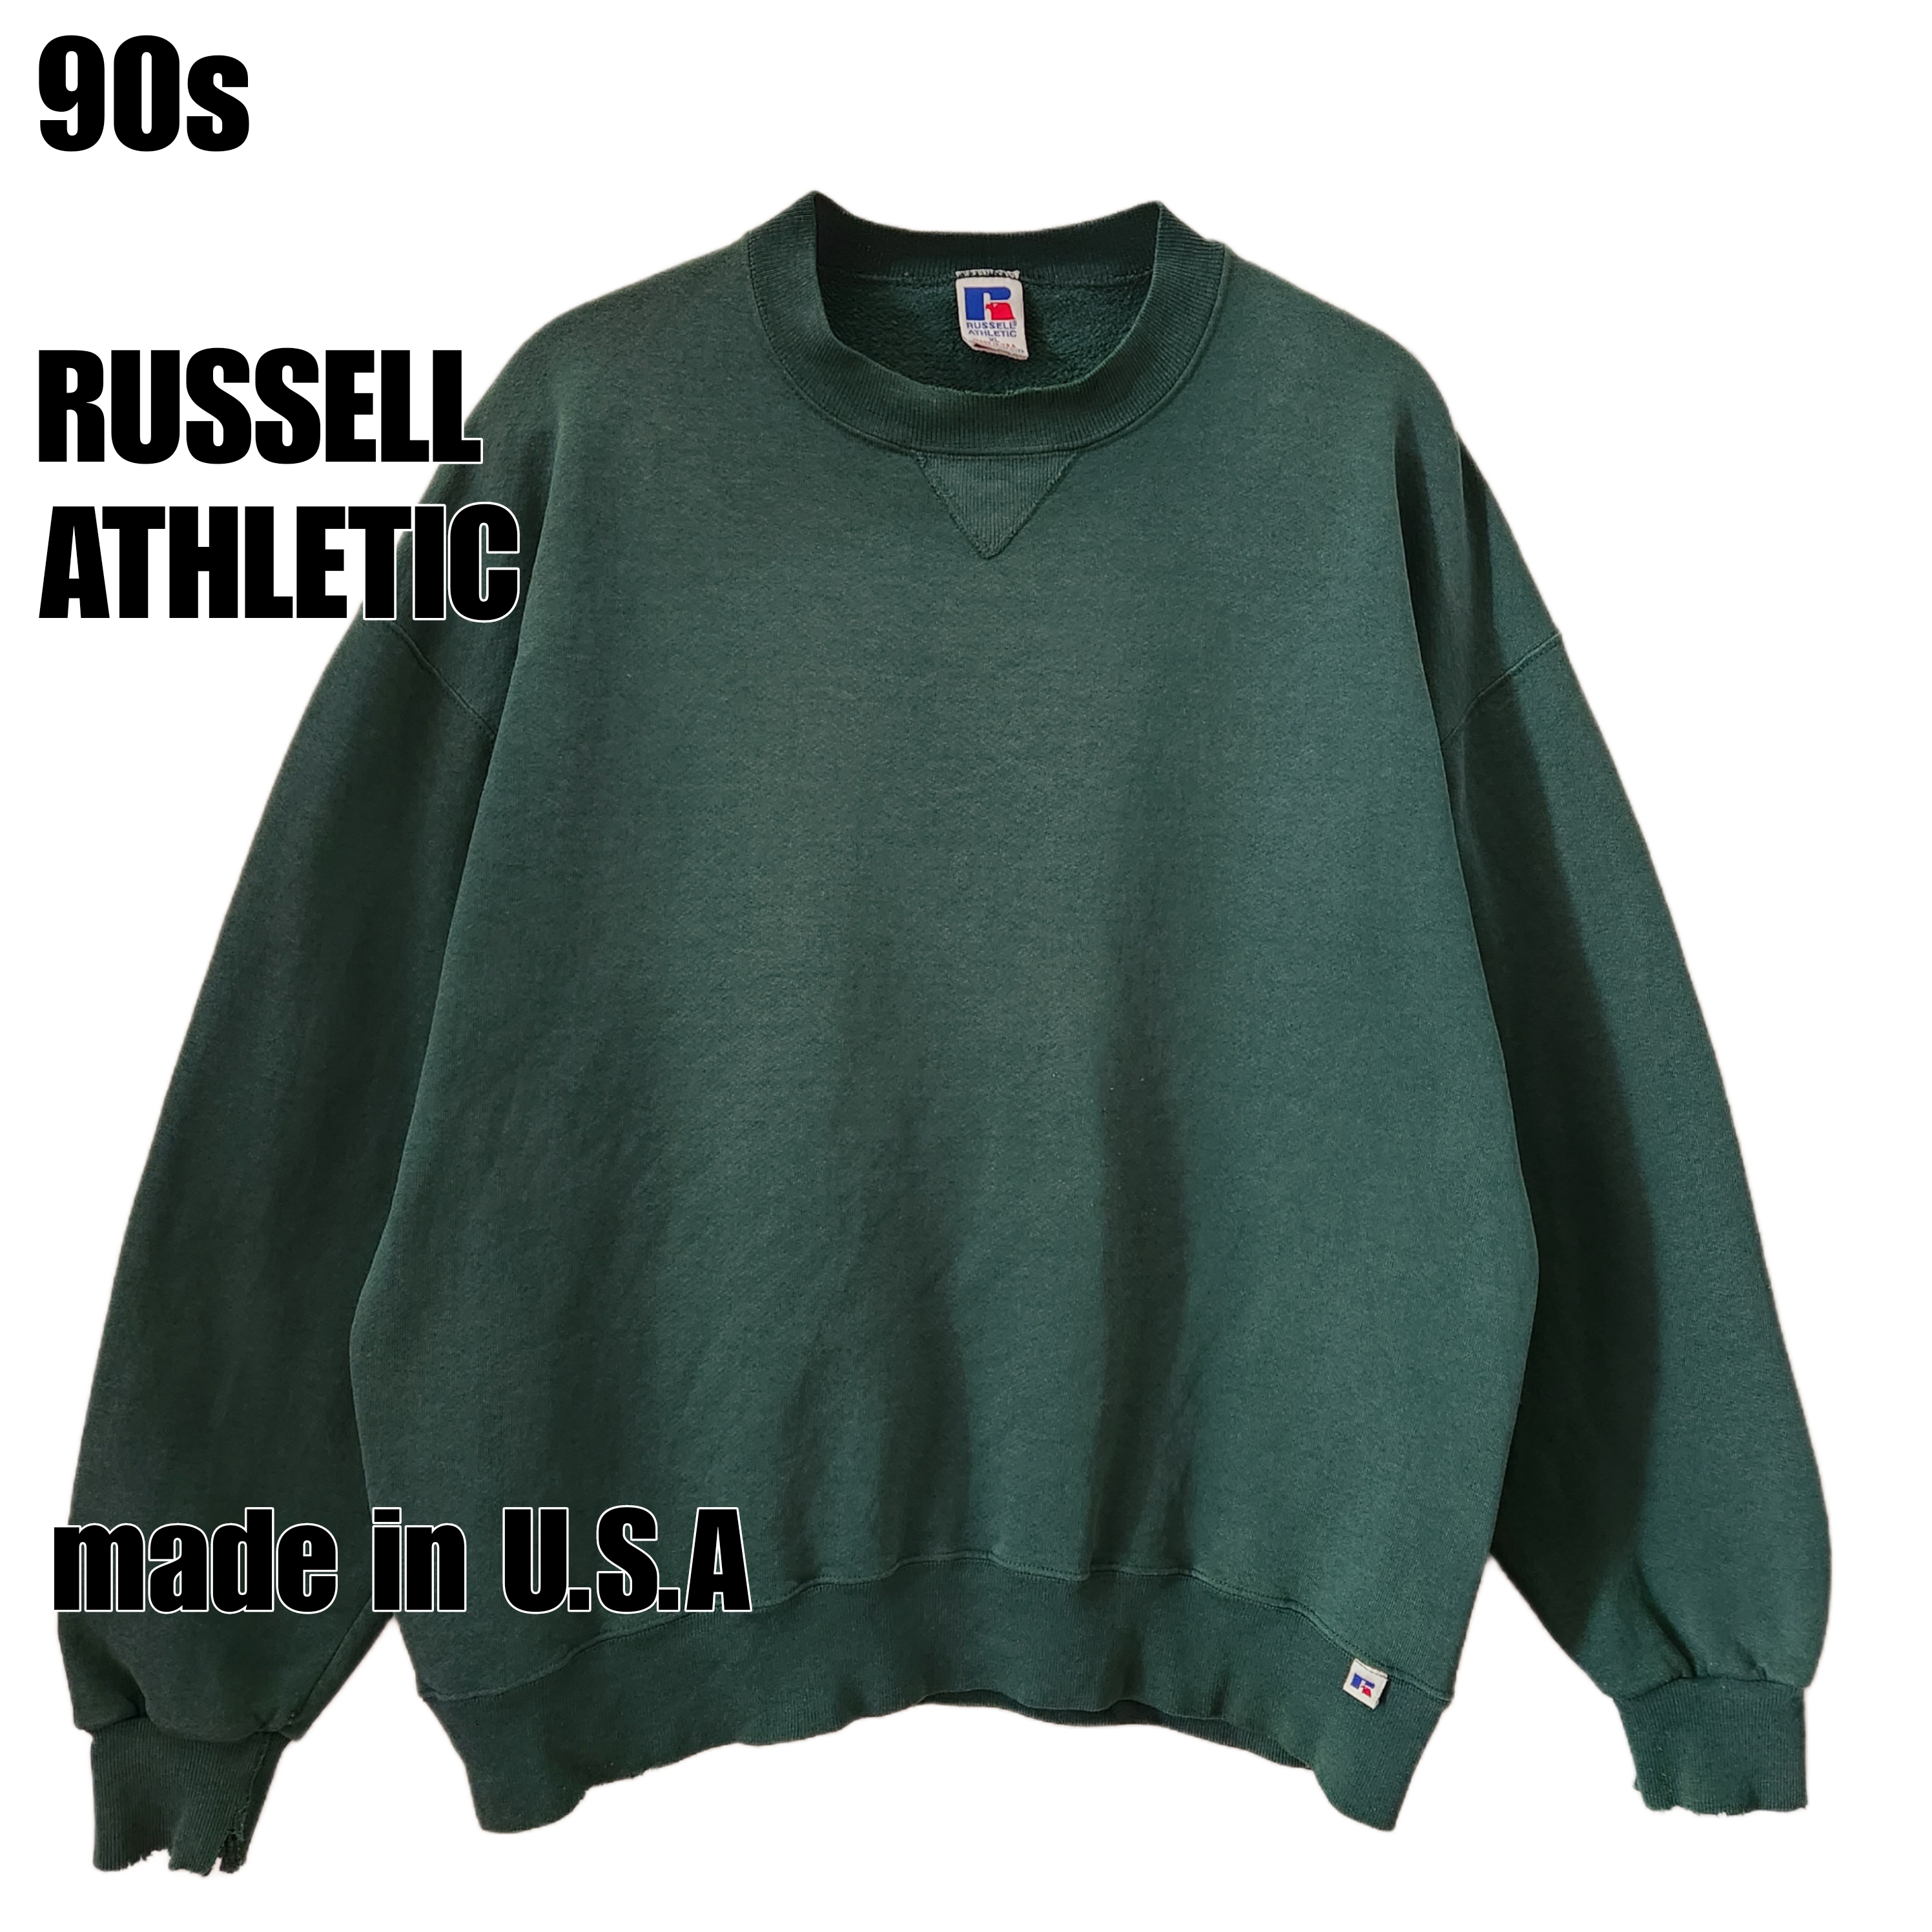 RUSSELL ATHLETIC スウェット MADE IN USA 90s L-